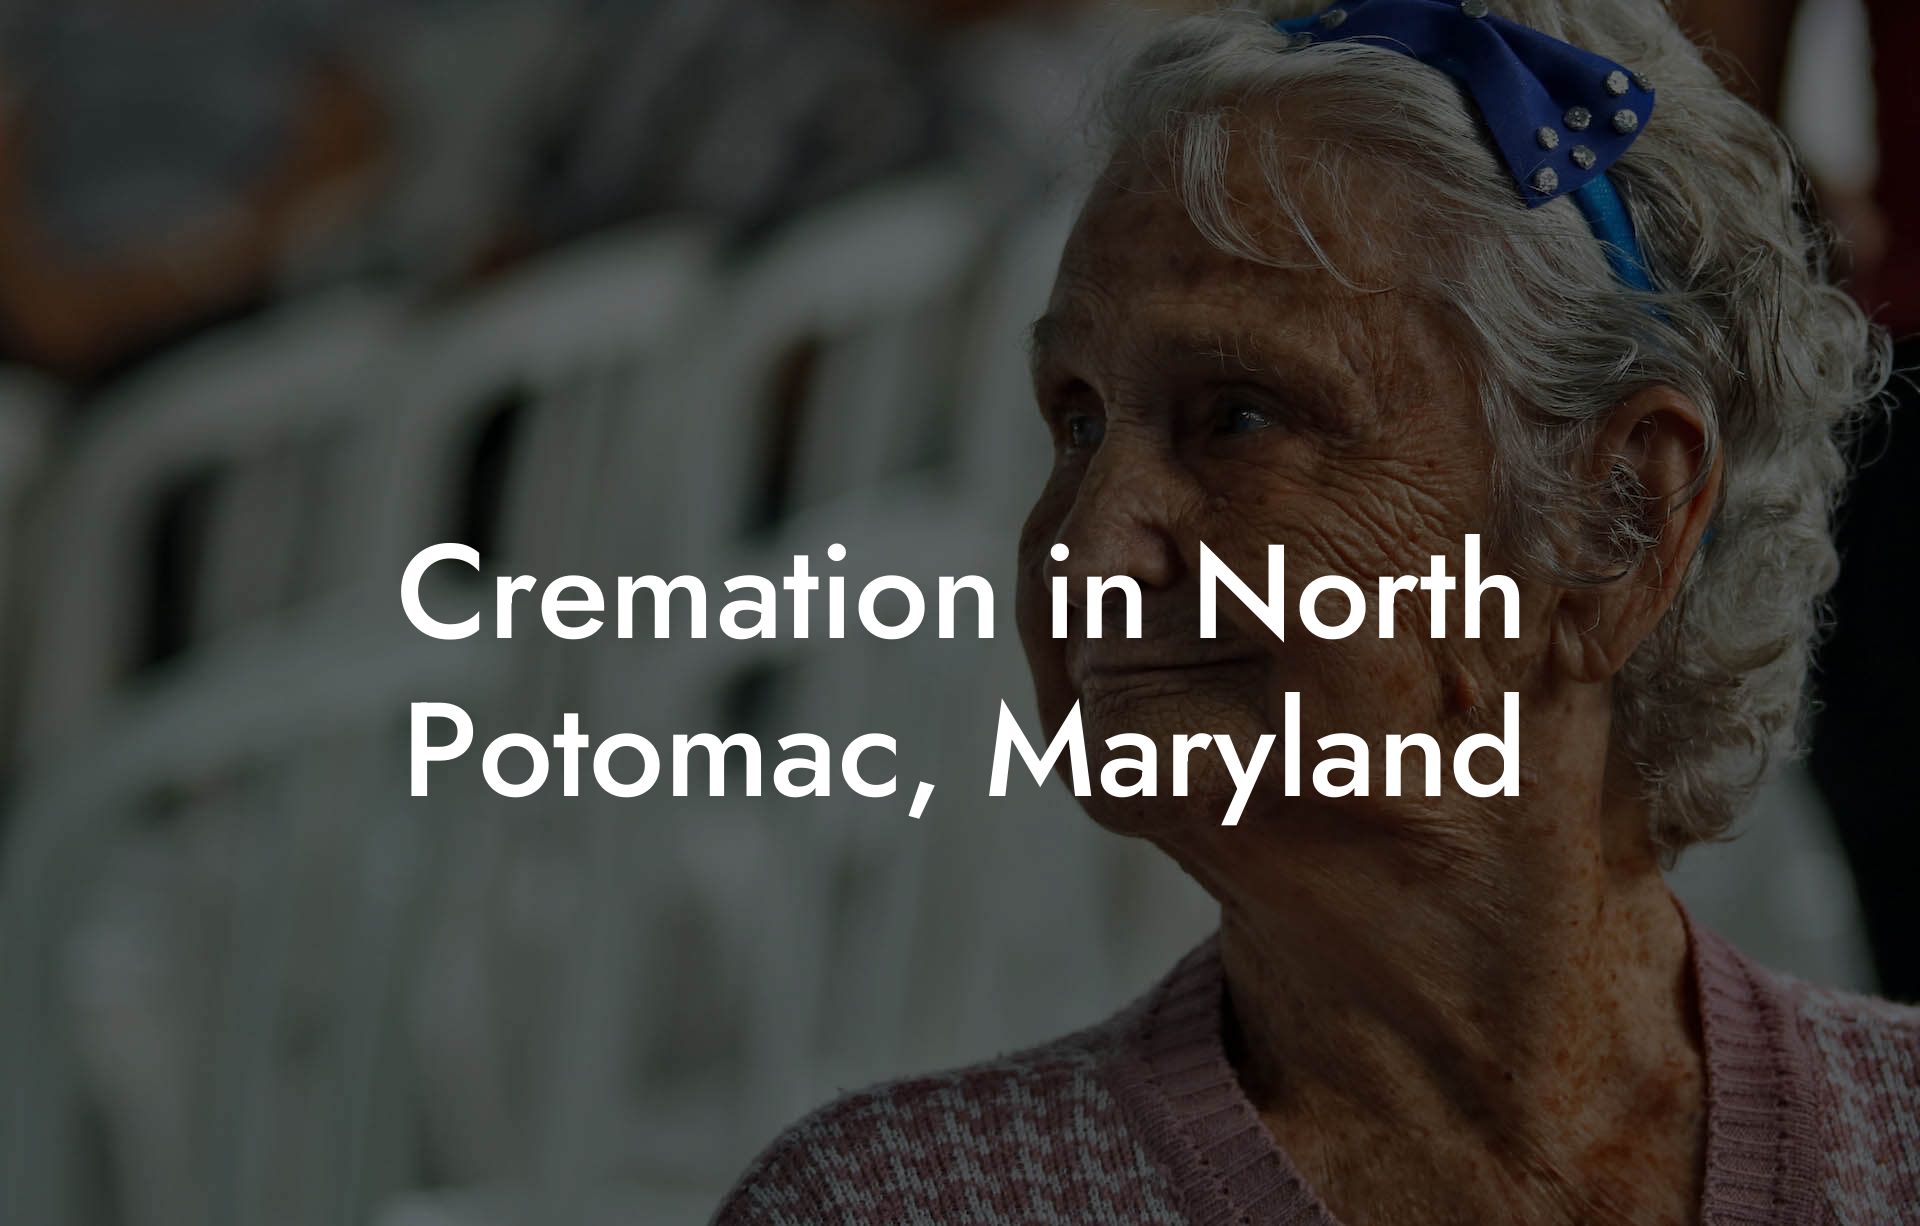 Cremation in North Potomac, Maryland